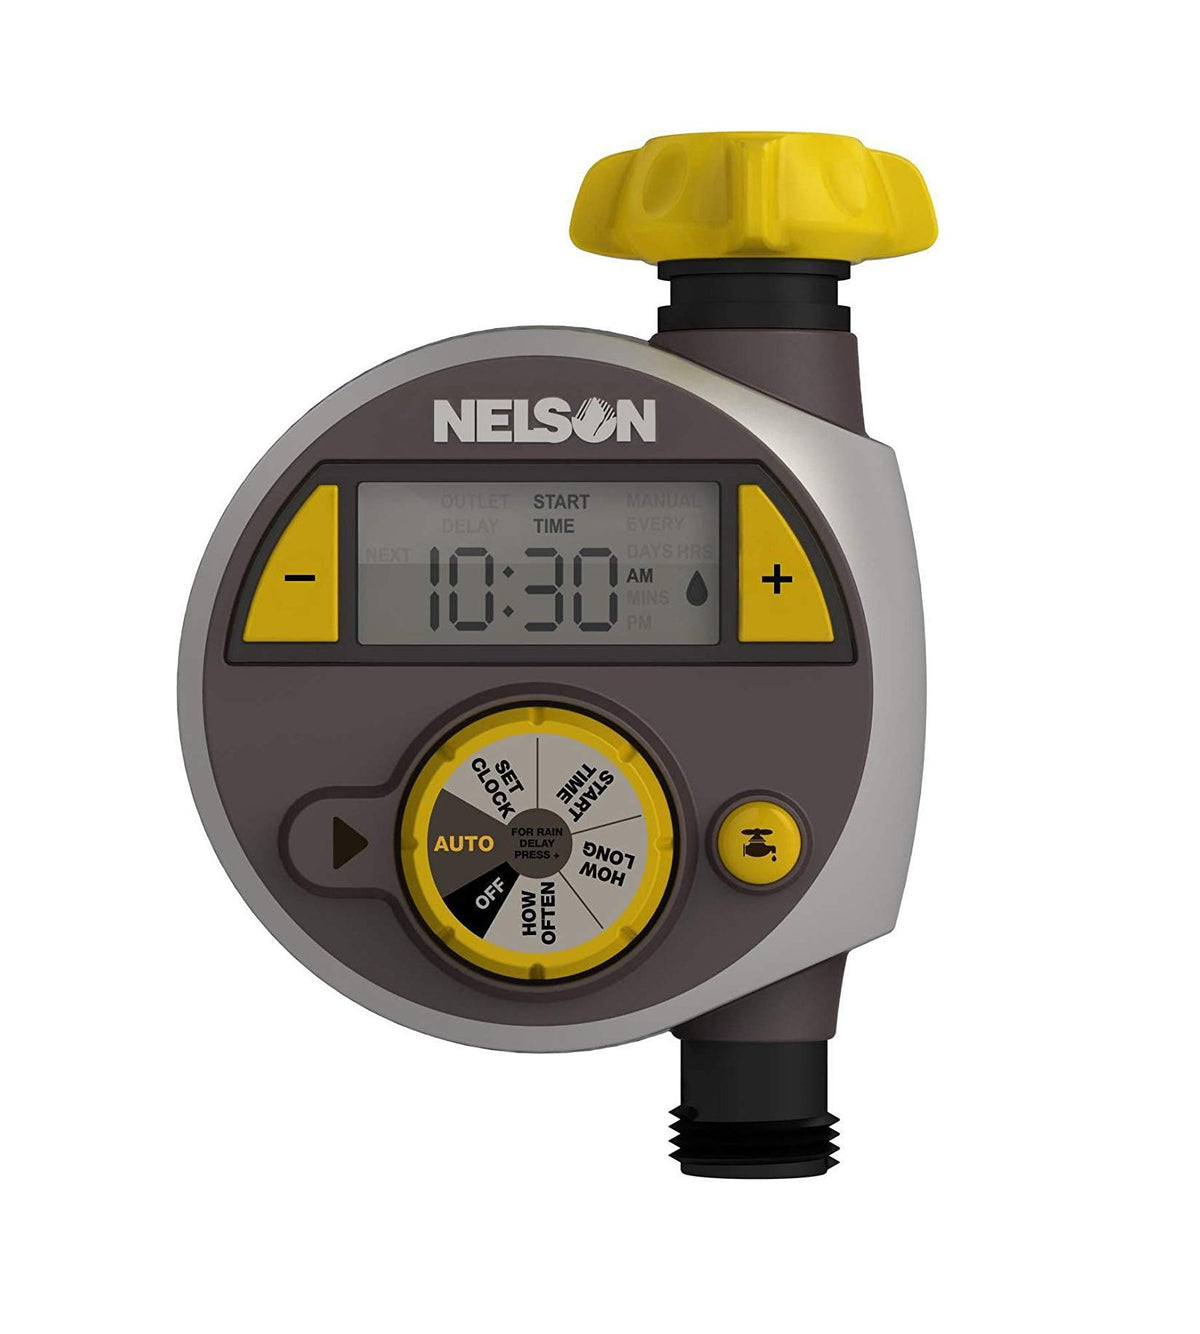 Buy nelson water timer 56607 instructions - Online store for lawn & plant care, water timers in USA, on sale, low price, discount deals, coupon code